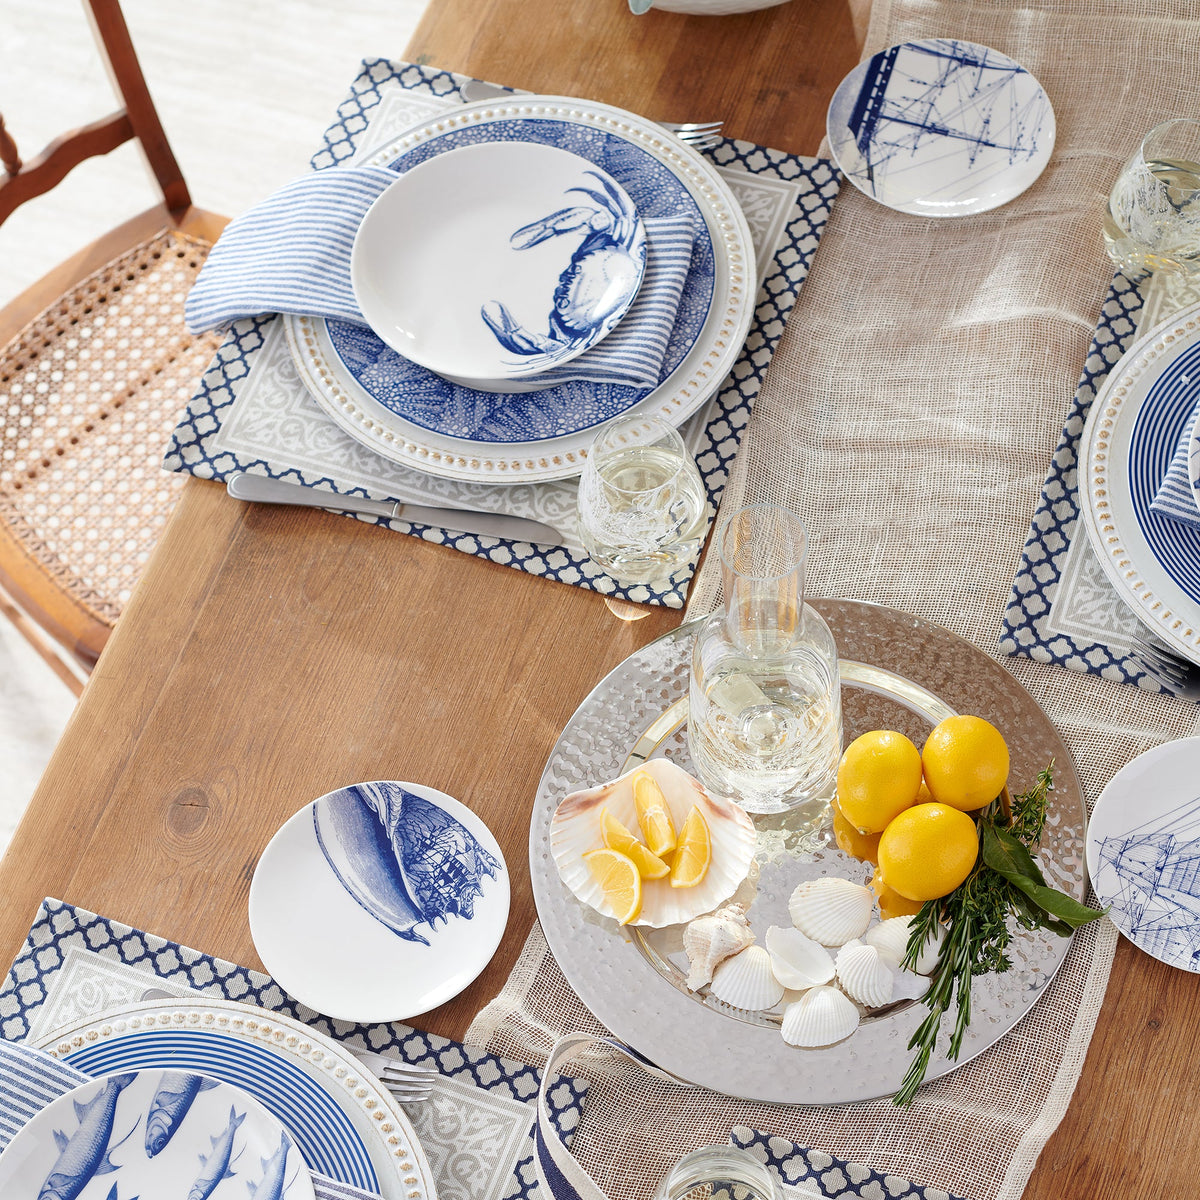 A beach-inspired table setting with Caskata Artisanal Home&#39;s Shells Canapé Plates, adorned with blue and white designs and accompanied by fresh lemons.